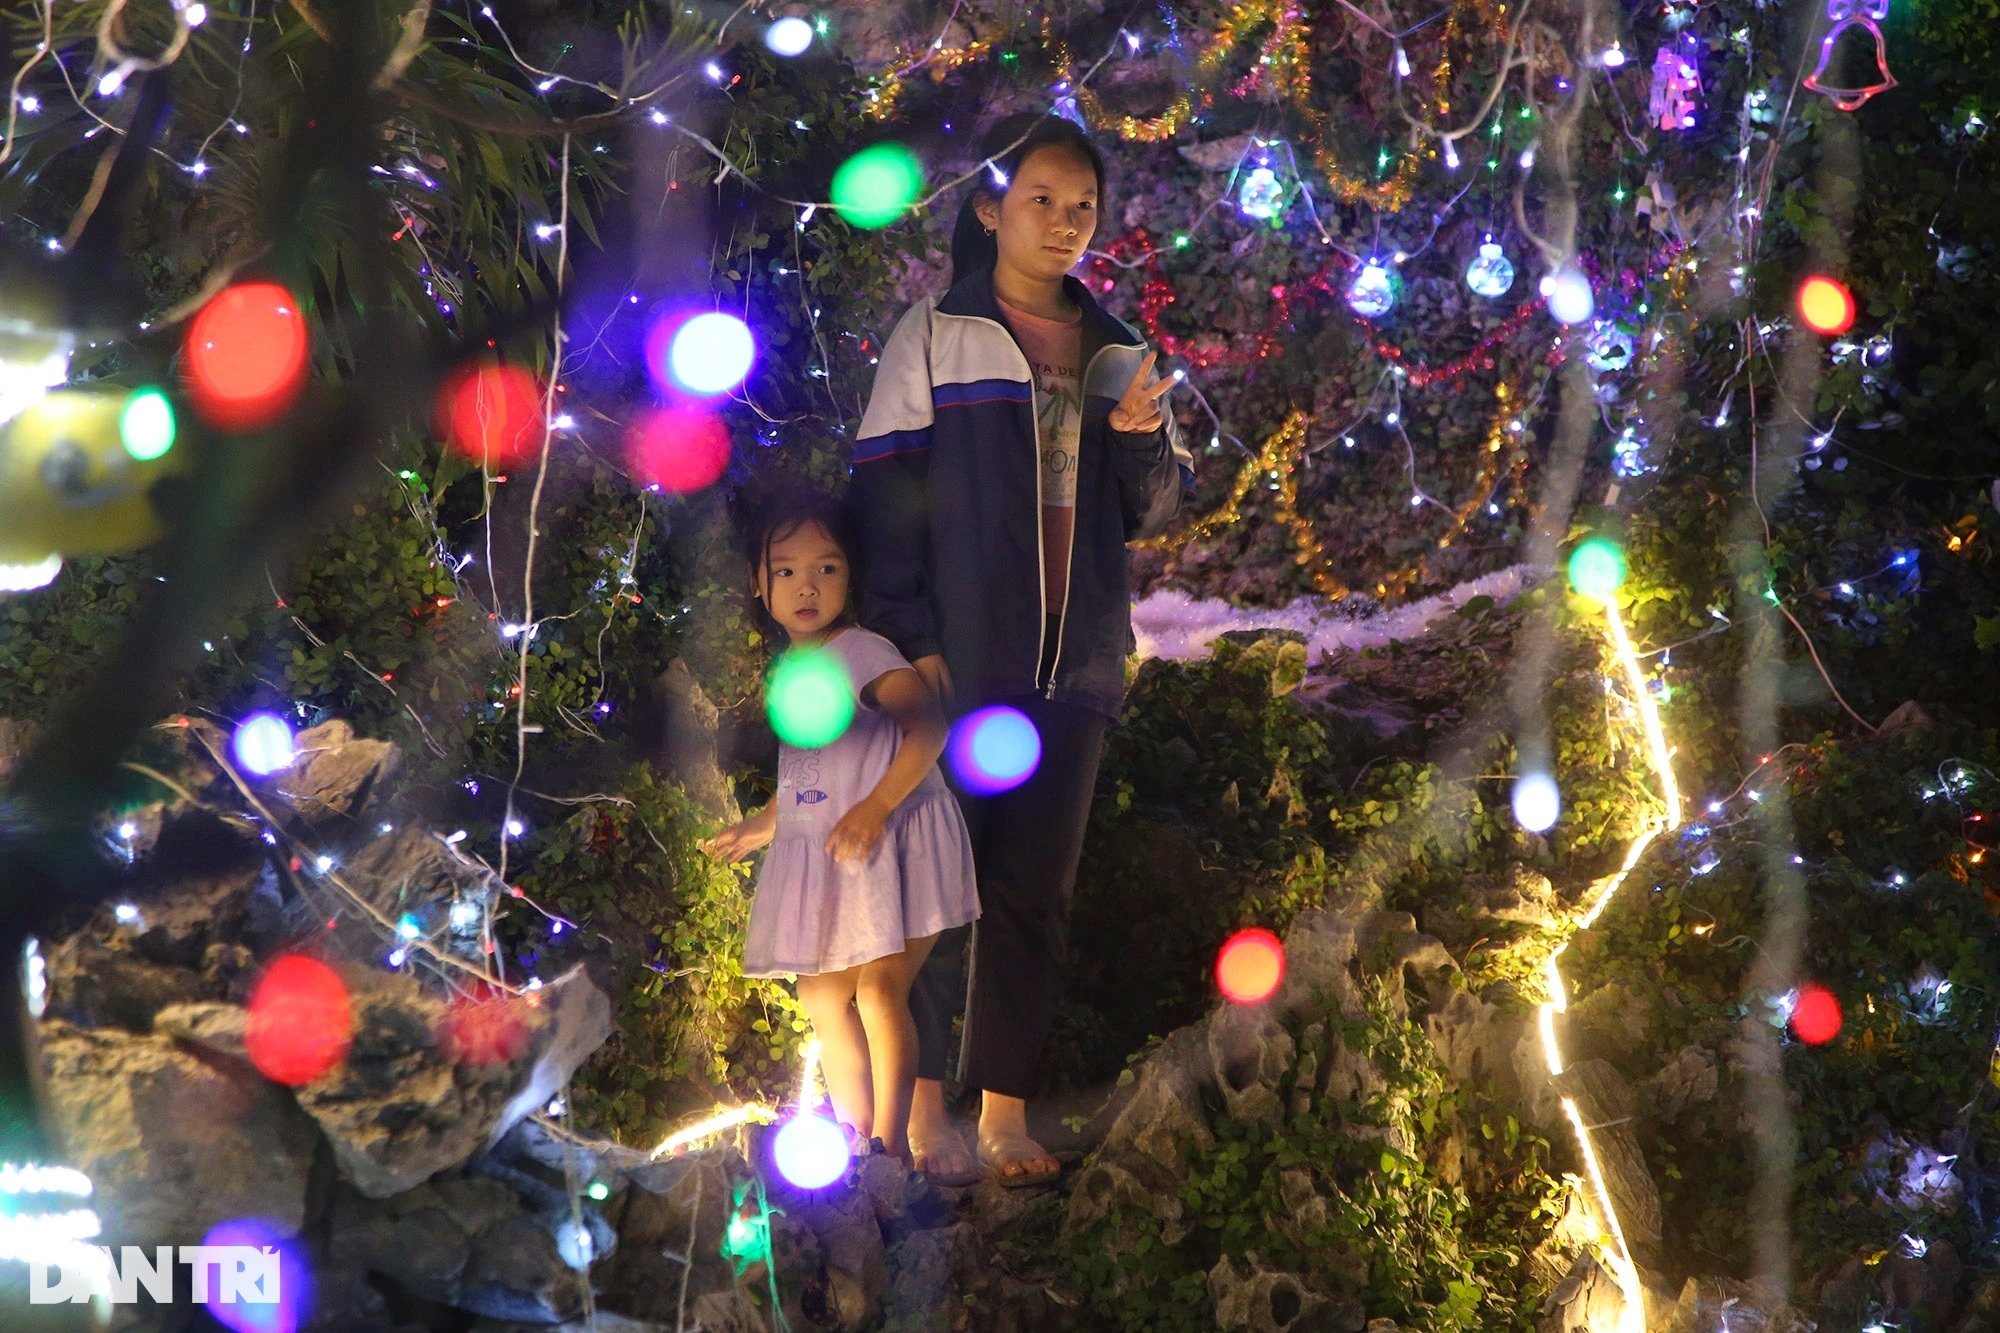 The 100-year-old village in Hanoi shimmers like a fairyland on Christmas - 5